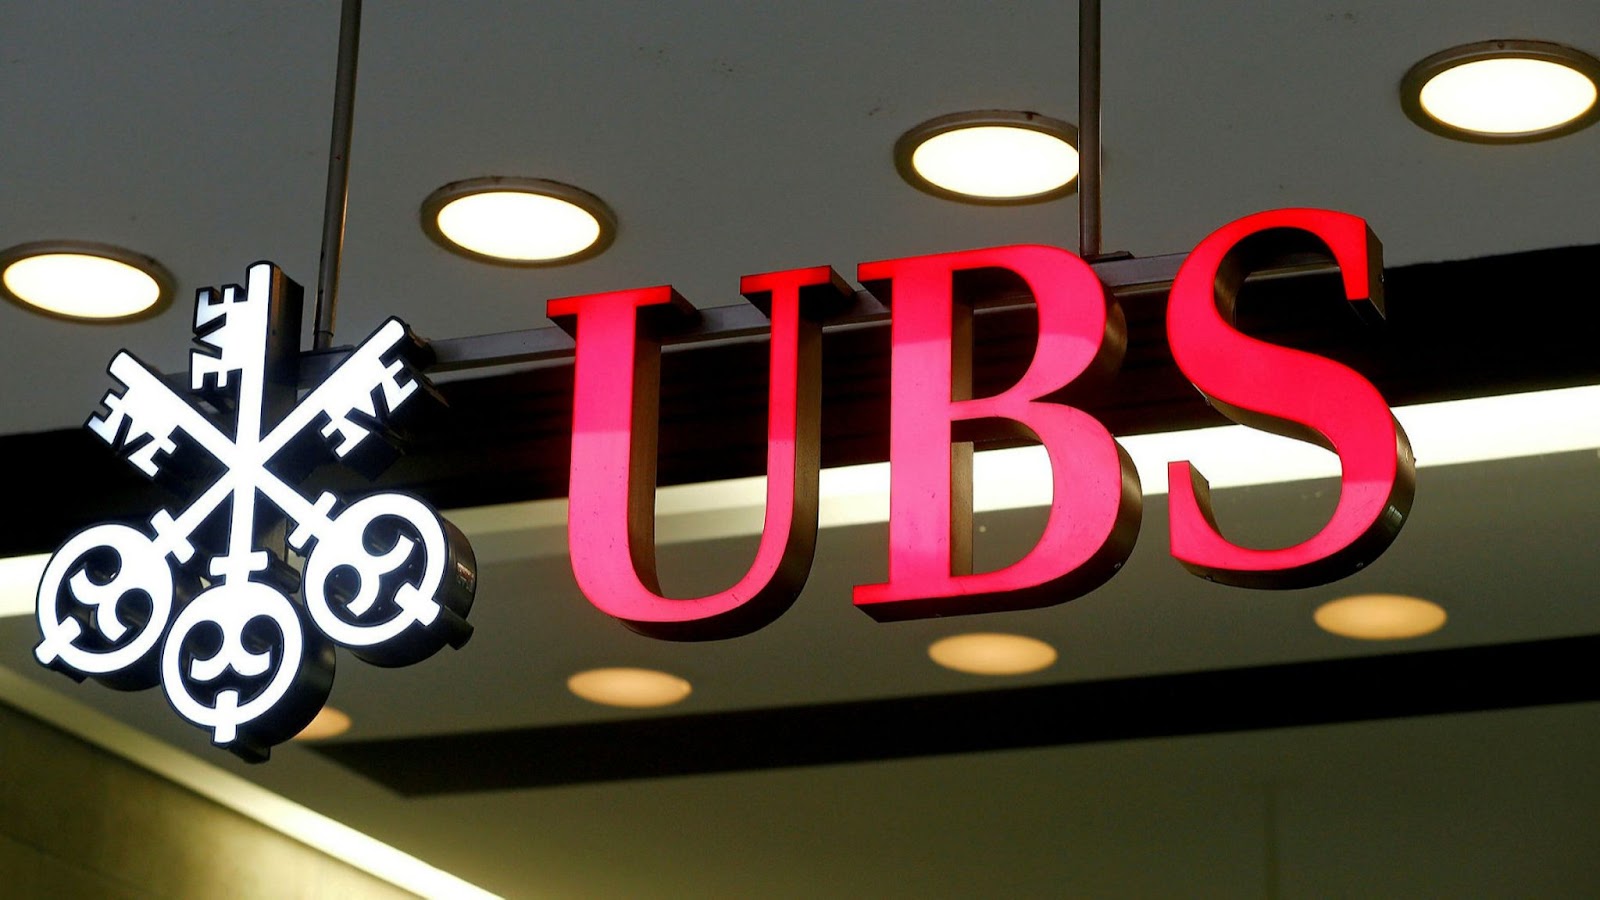  UBS Group